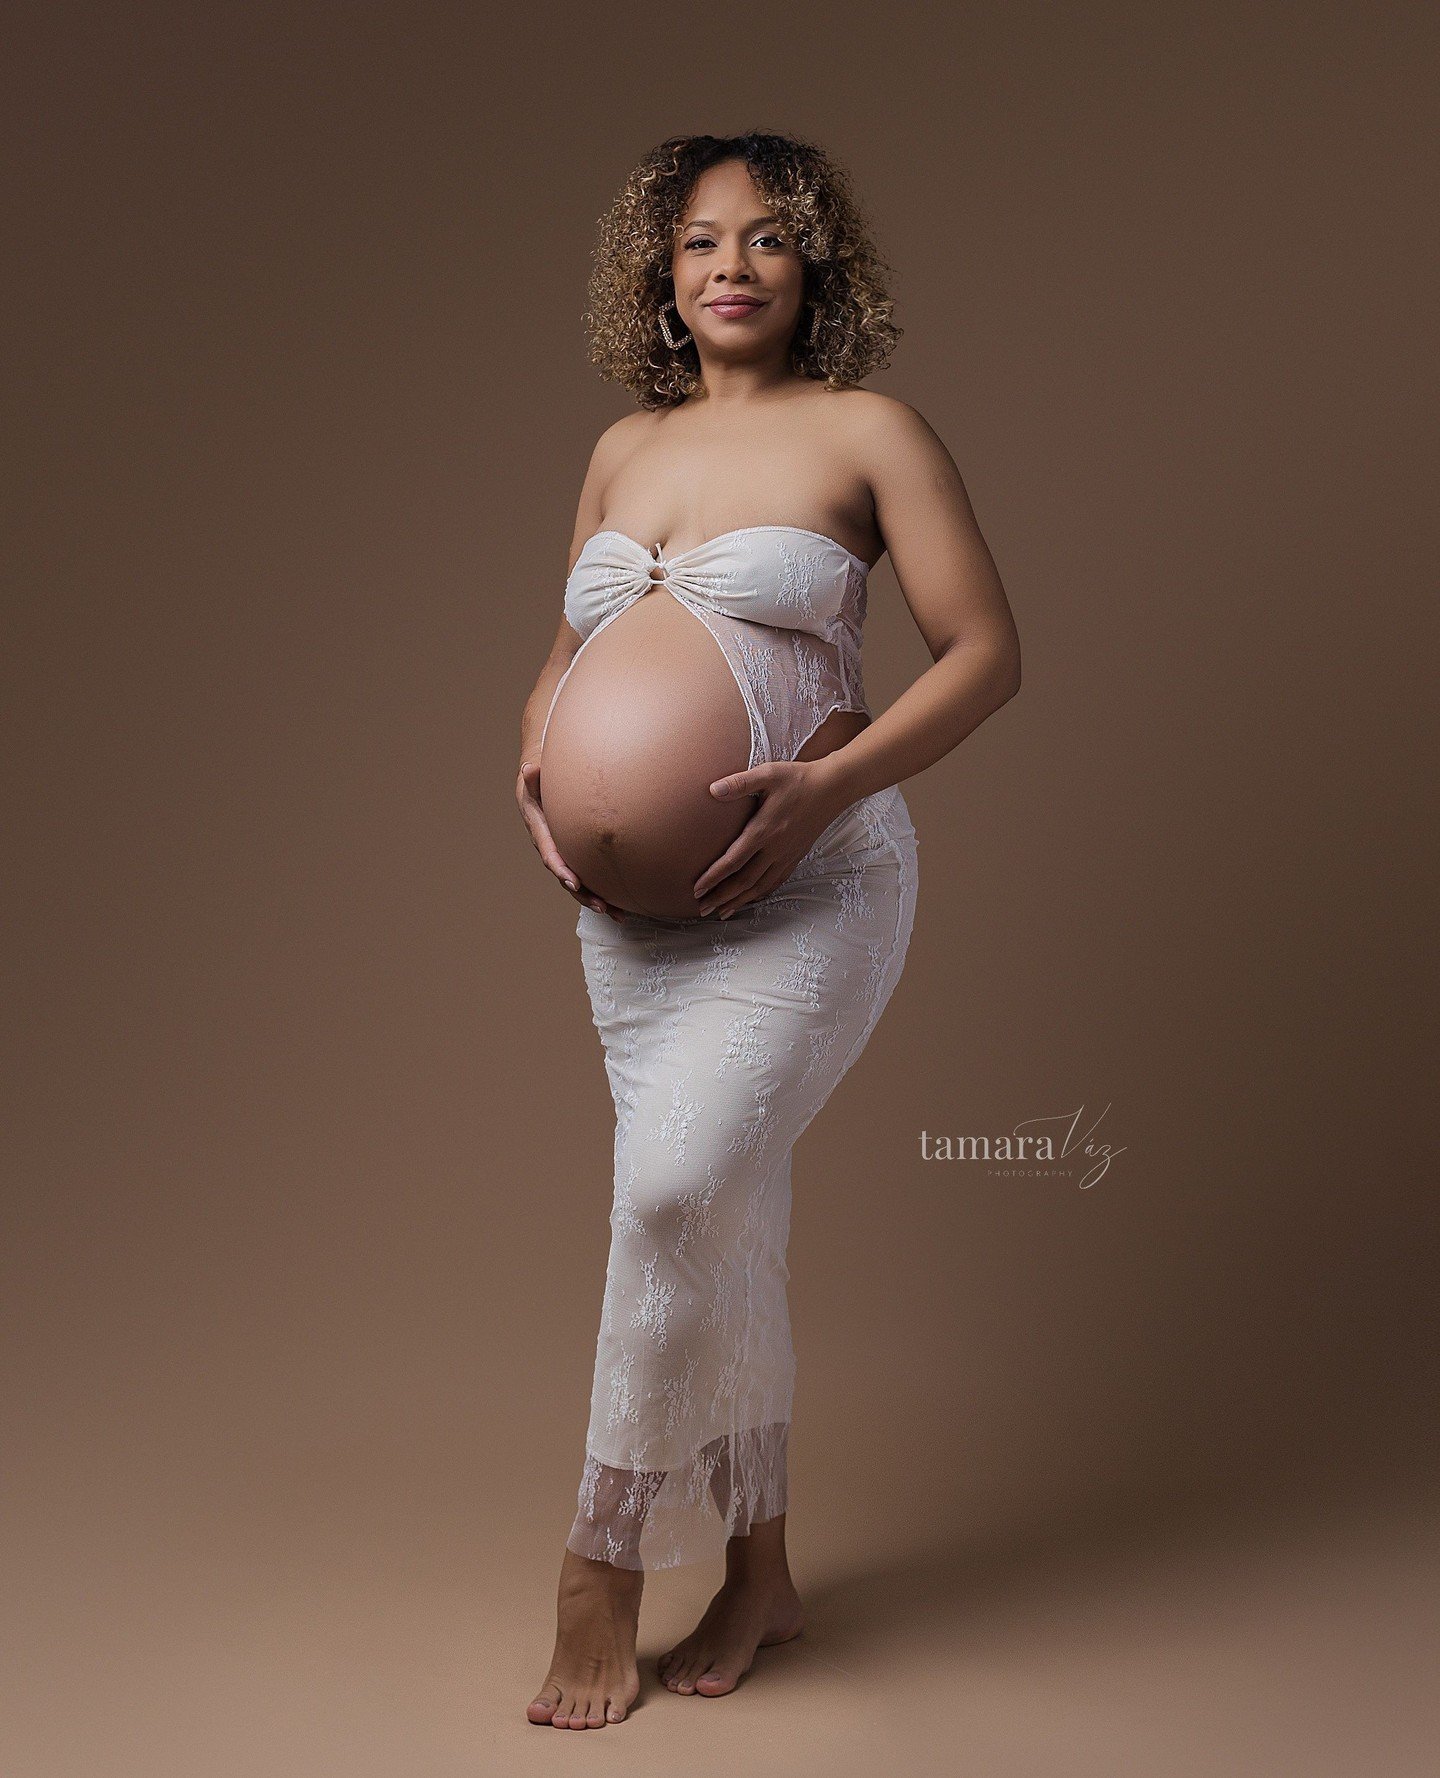 Beautiful mama expecting twins! I did Big sis Lenna's newborn session 2 years ago! 😍⁠

MUA @glam_by_laila
⁠
.⁠
.⁠
⁠
⁠
⁠
Want to know more about our customized sessions?  Contact us clicking on our link in Bio!⁠
⁠
🏆️2022 Most loved Family Photograph